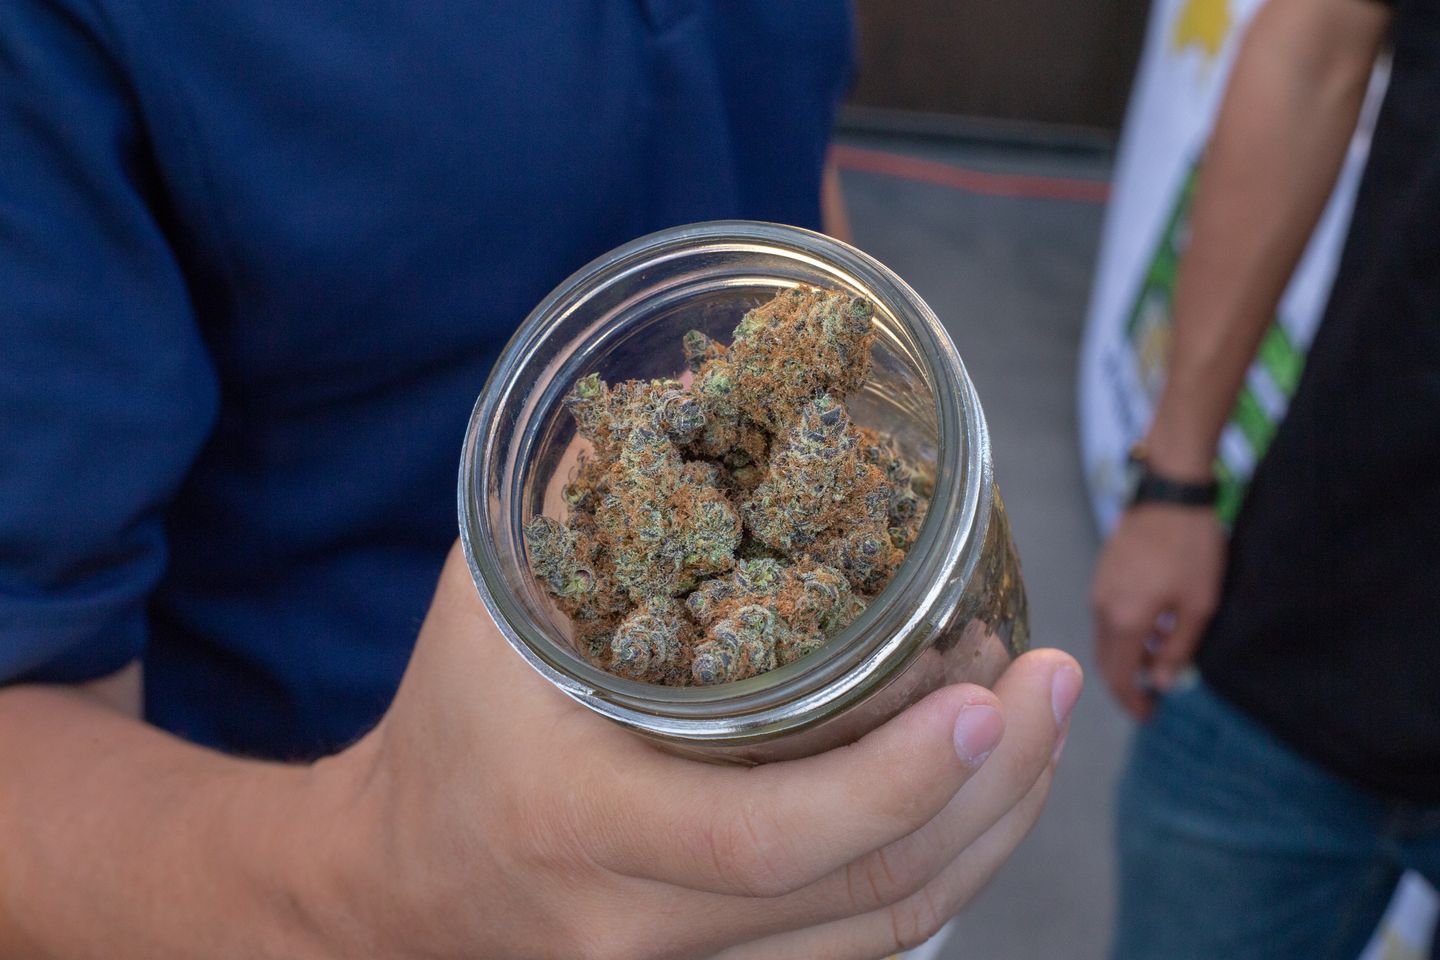 The best jars and bags for curing weed in 2023